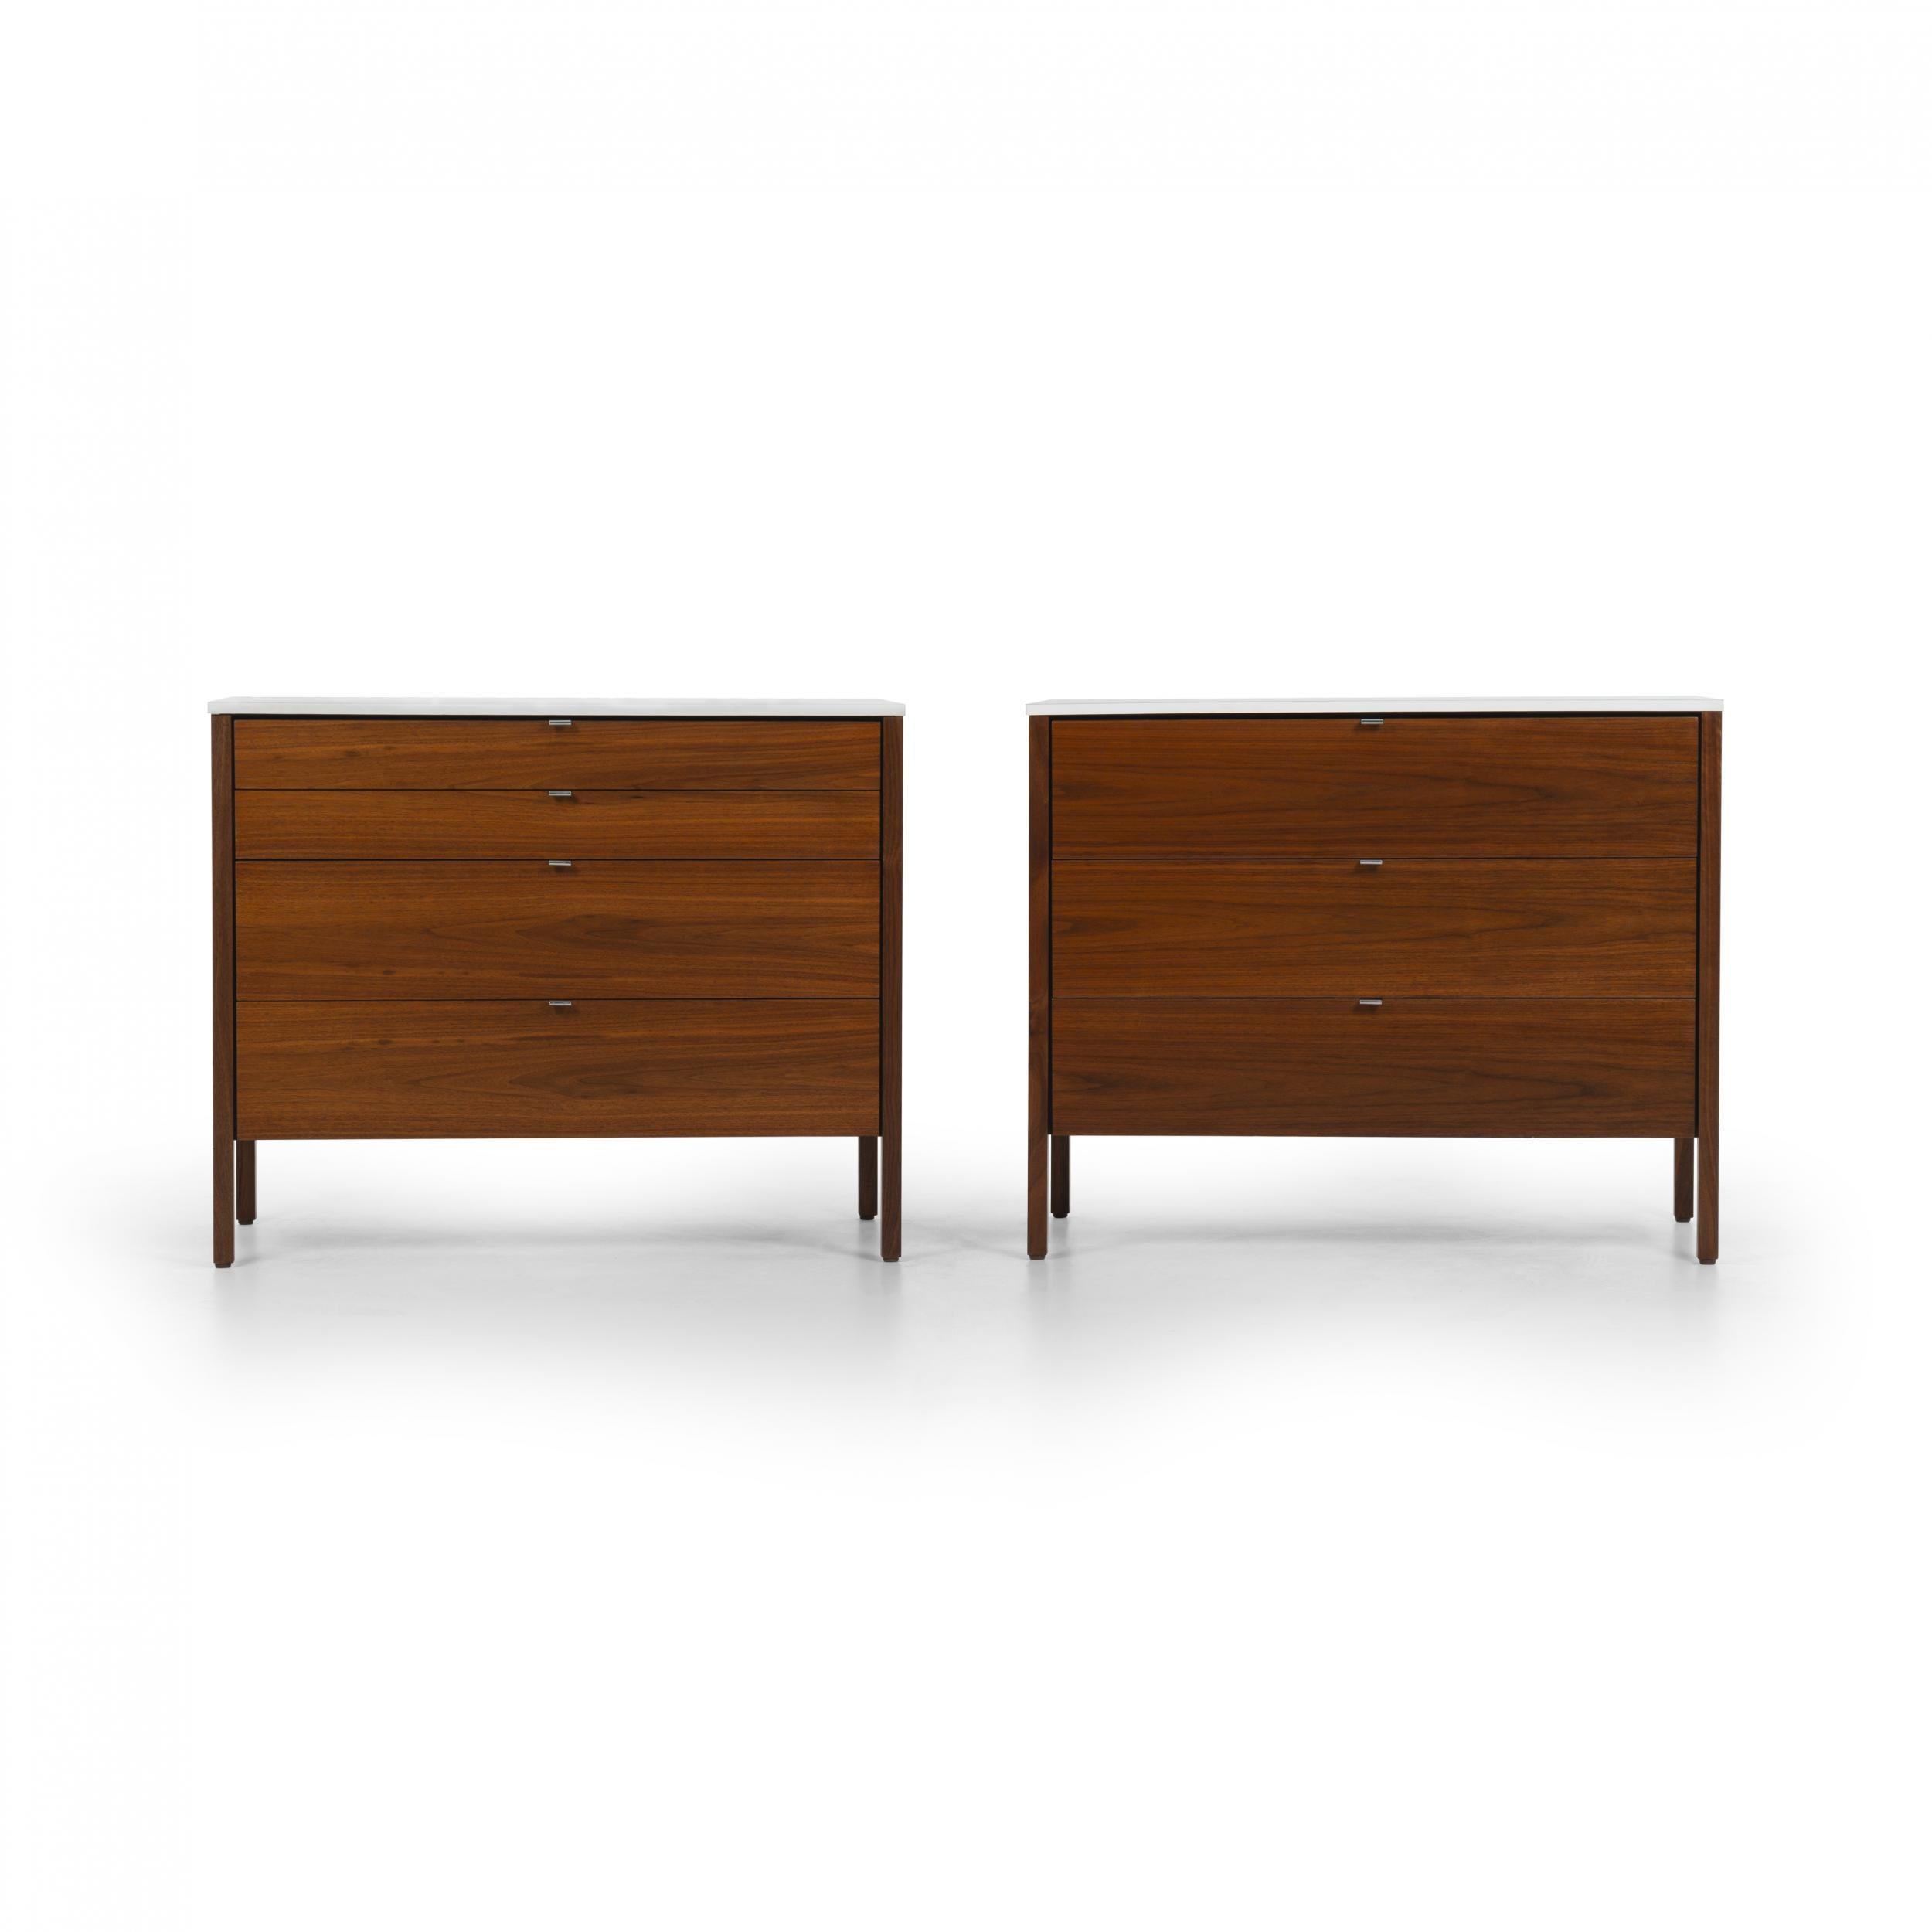 Pair of Florence Knoll Dressers, model 324-1 nicely figured walnut cases with oil finish, One case 4 drawers the other 3drawers with satin aluminum pulls with laminated plastic durable tops. Label underside [Knoll International].